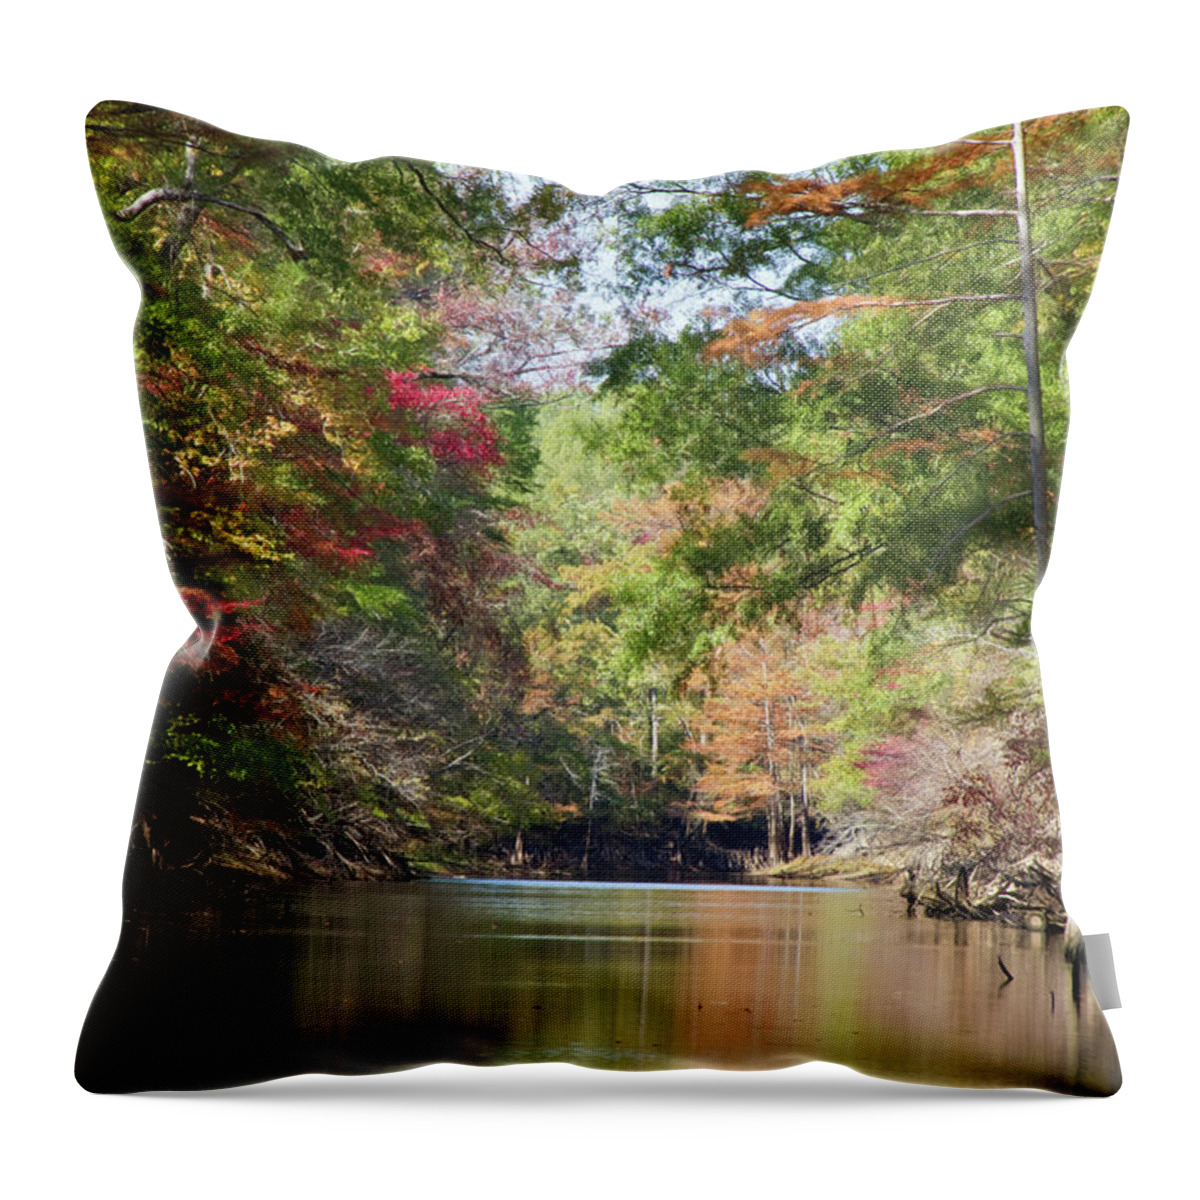 Autumn Throw Pillow featuring the photograph Autumn Over Golden Waters by Lana Trussell